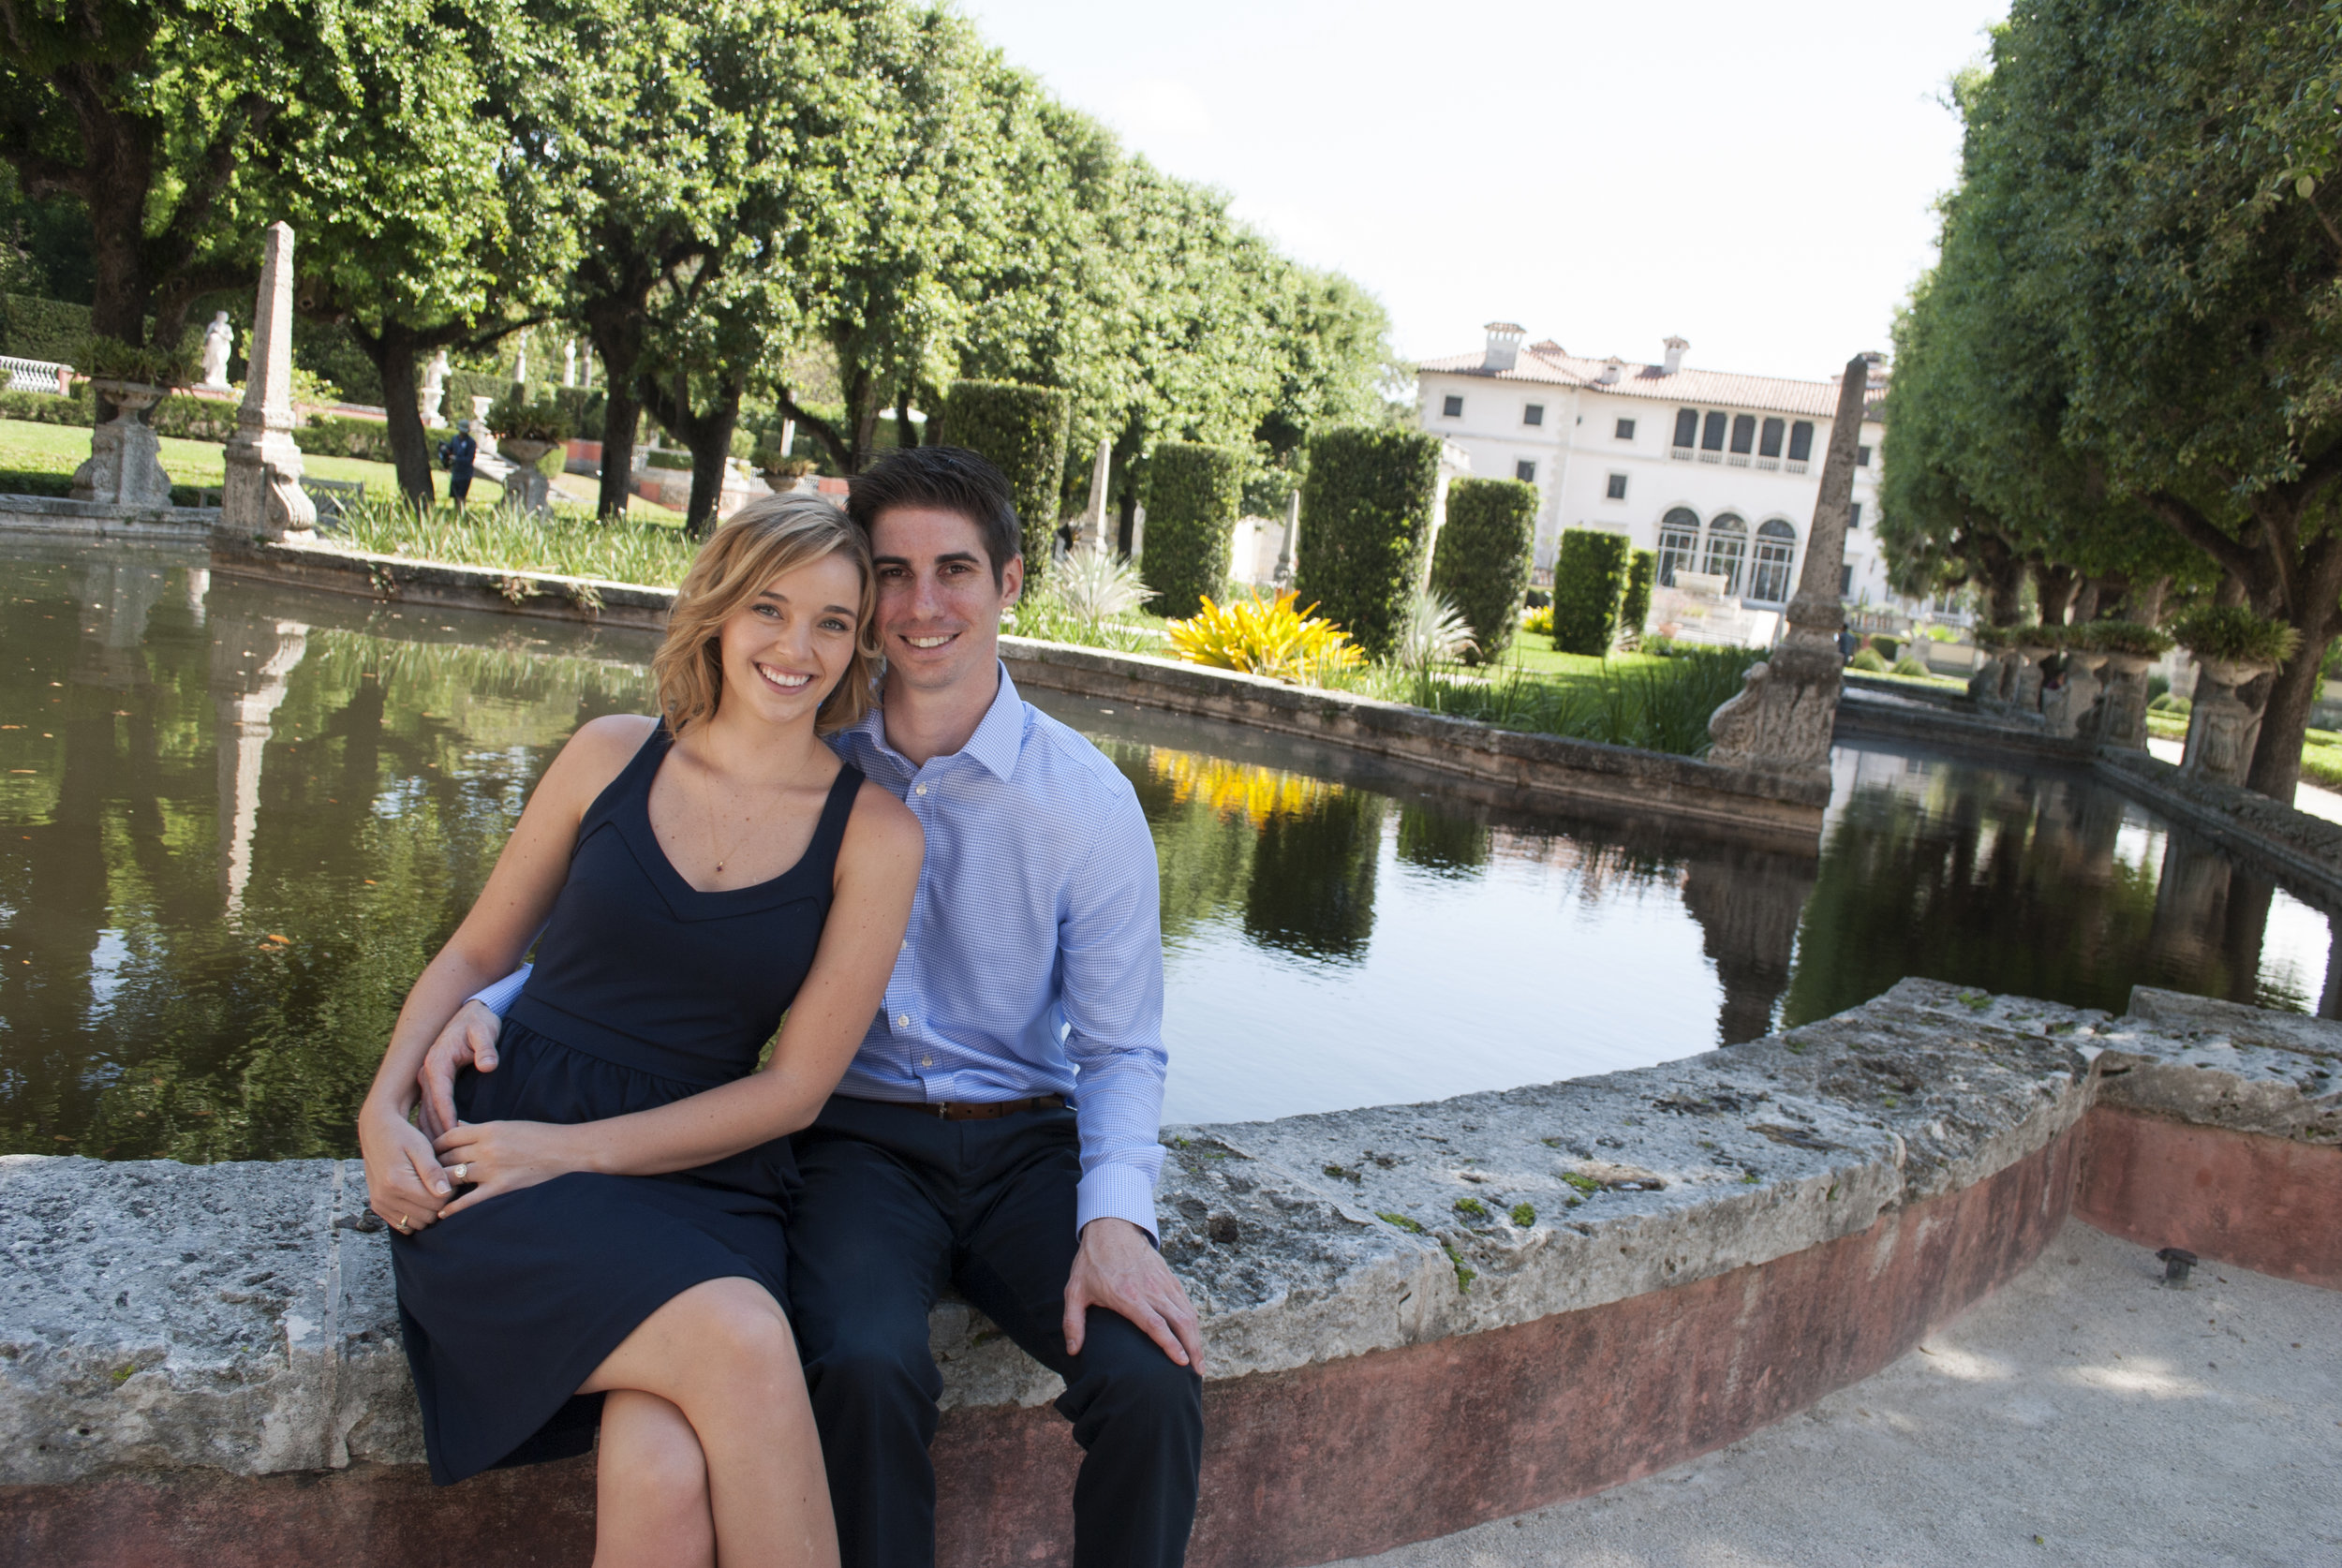  Kaila L. Partin and Brad C. Faig got engaged two months before her law school graduation. They chose the Villa Vizcaya for their engagement photos.   Miami, FL  